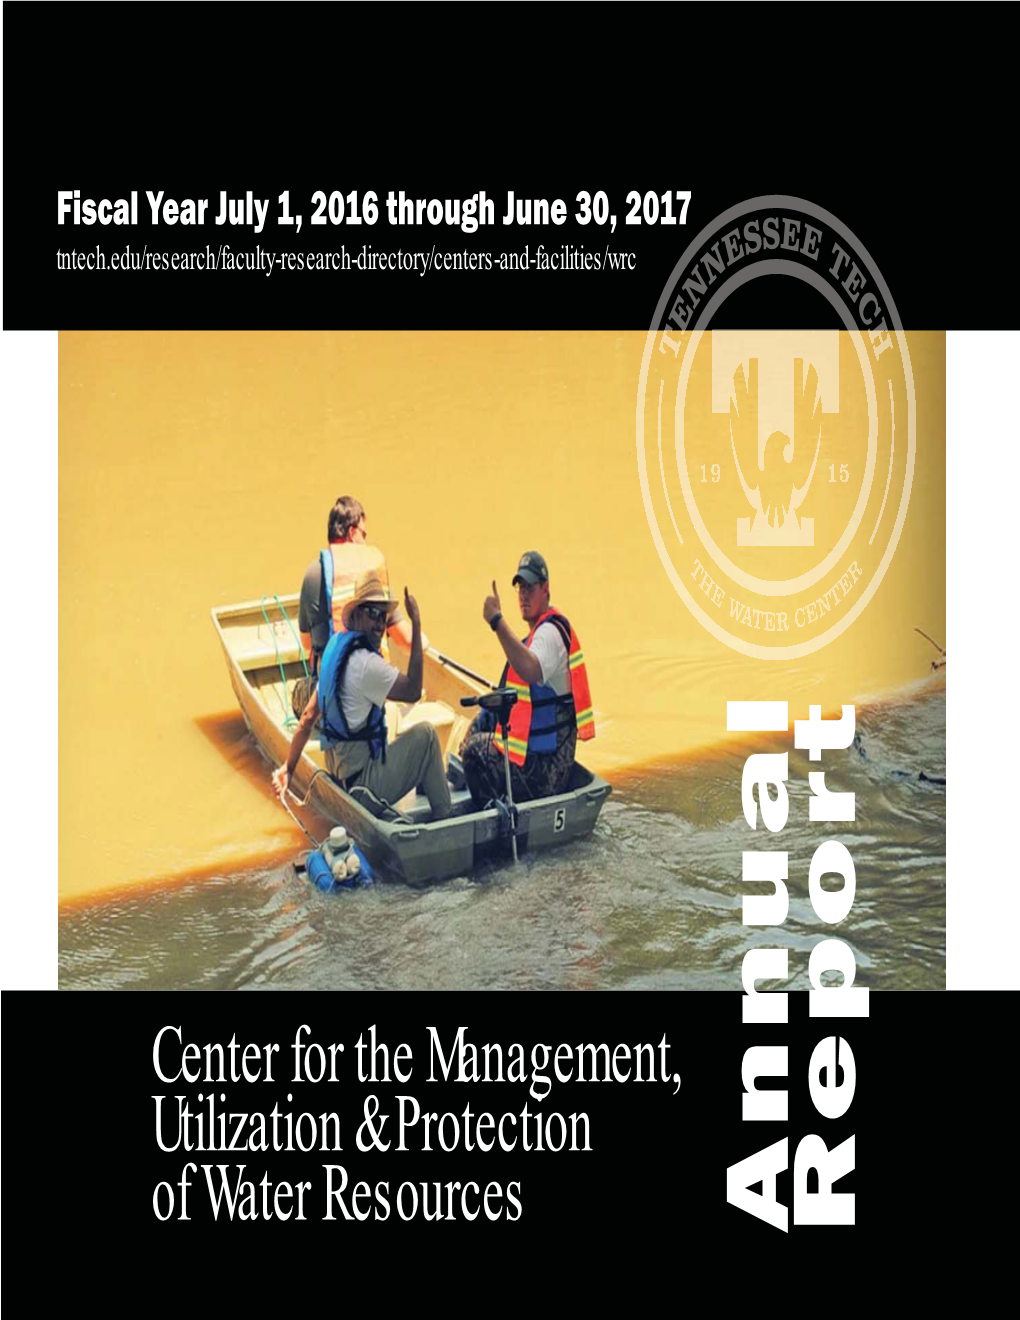 Center for the Management, Utilization & Protection of Water Resources